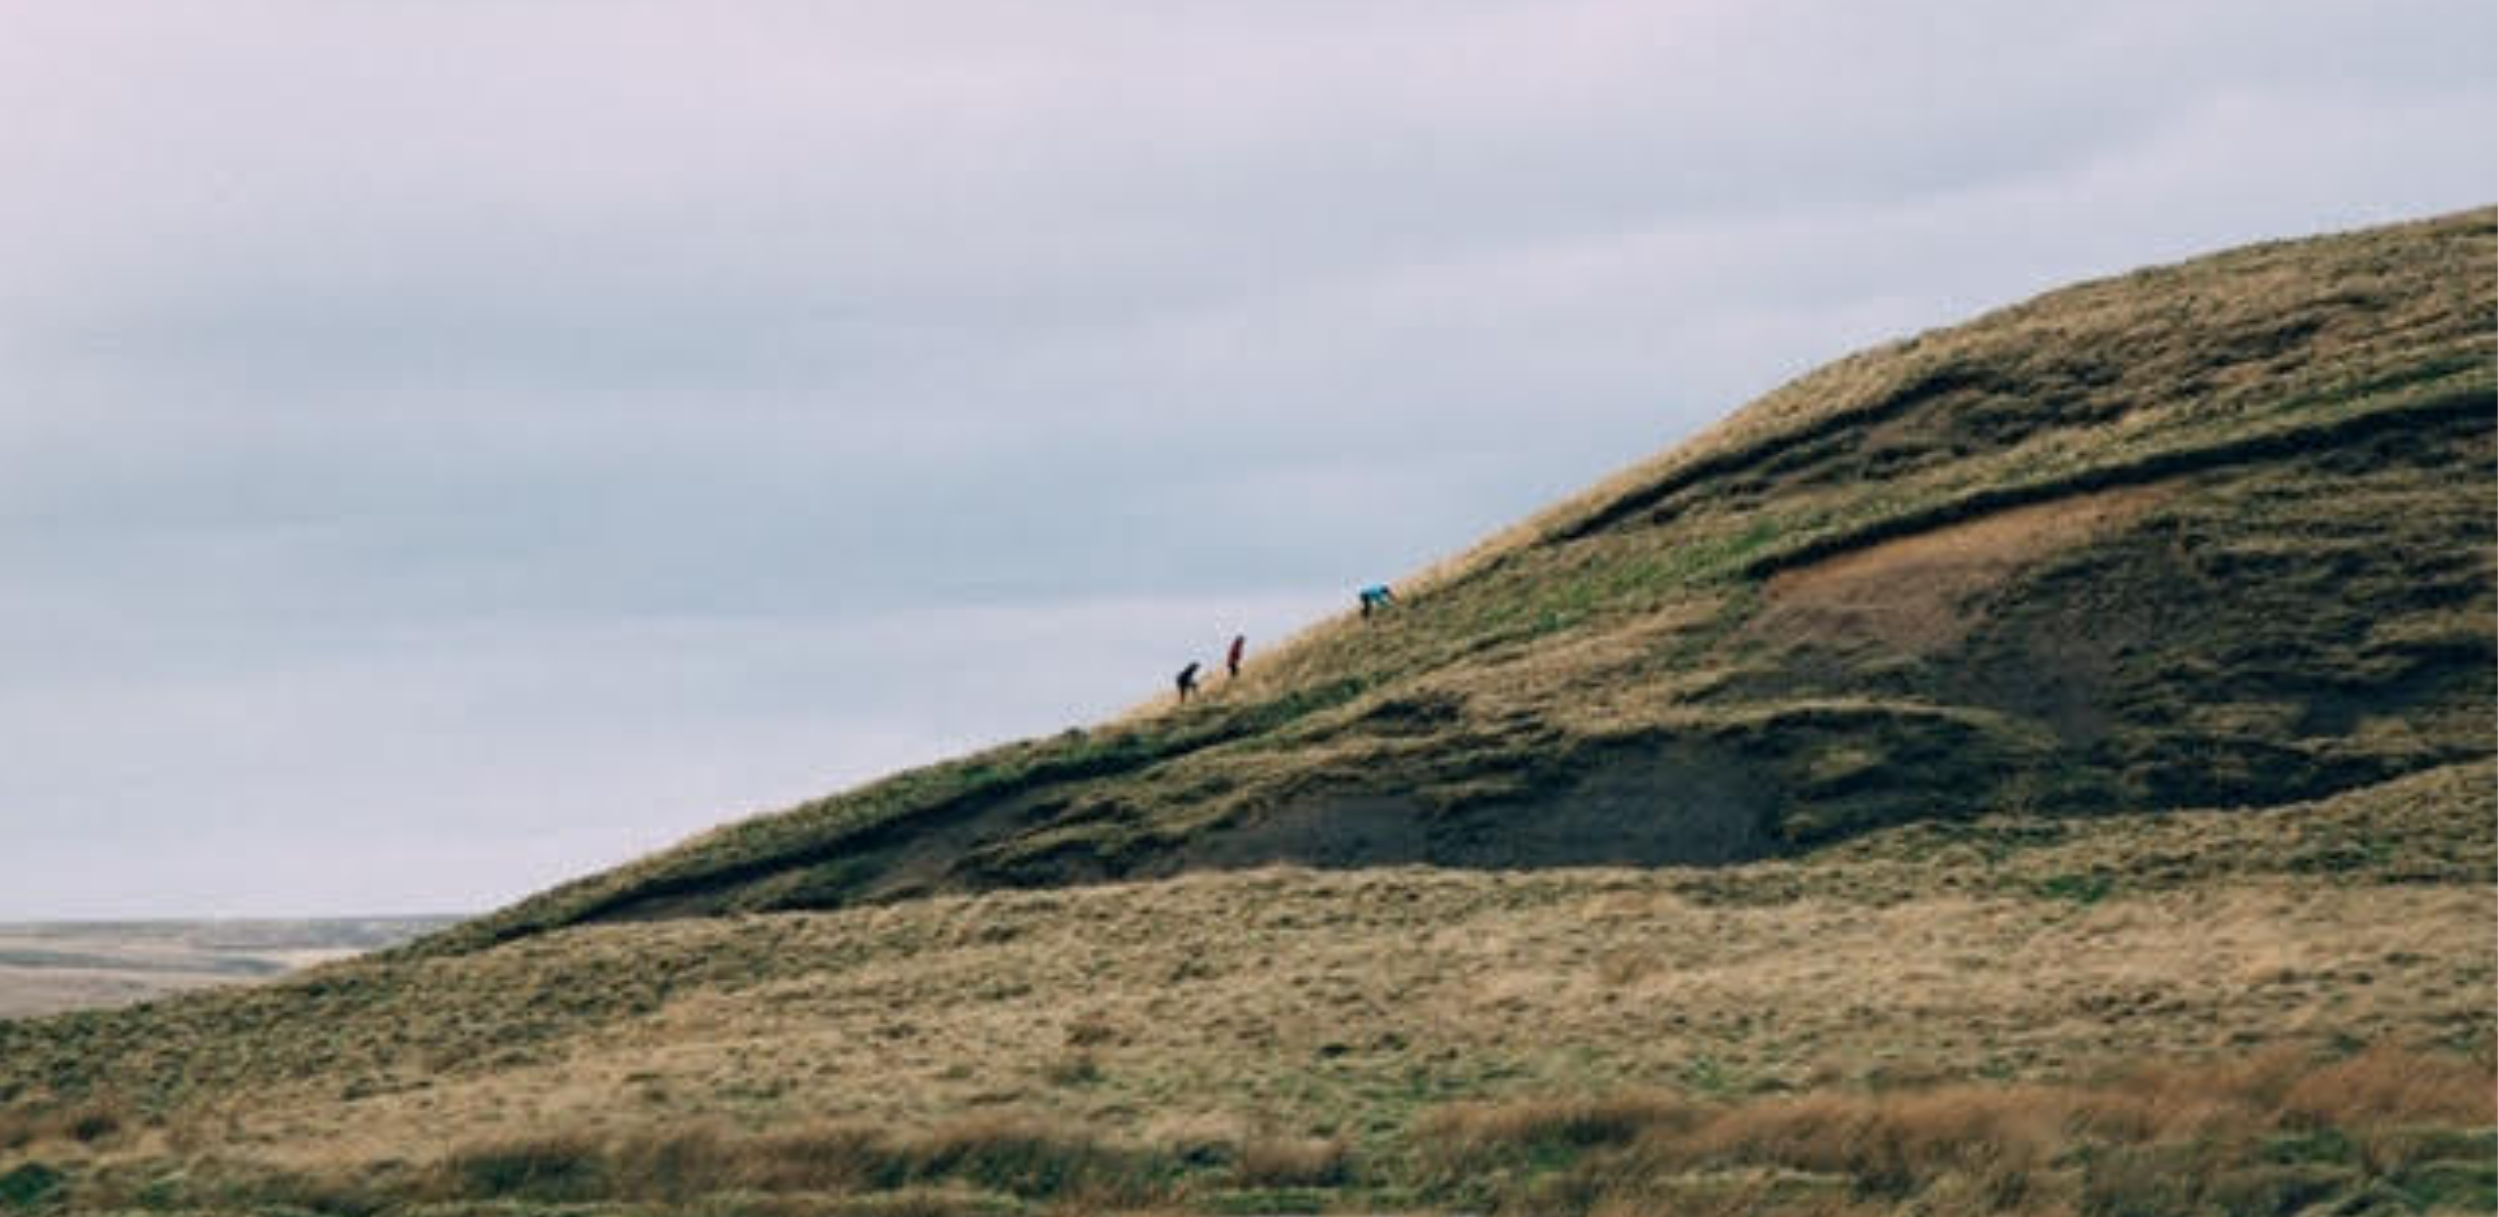 Viewed from a distance, three small figures are walking up a green hillside, which inclines upward from left to right. The figures are wearing bright waterproof jackets and are outlined against a grey, cloudy sky, which fills the upper left of the image.